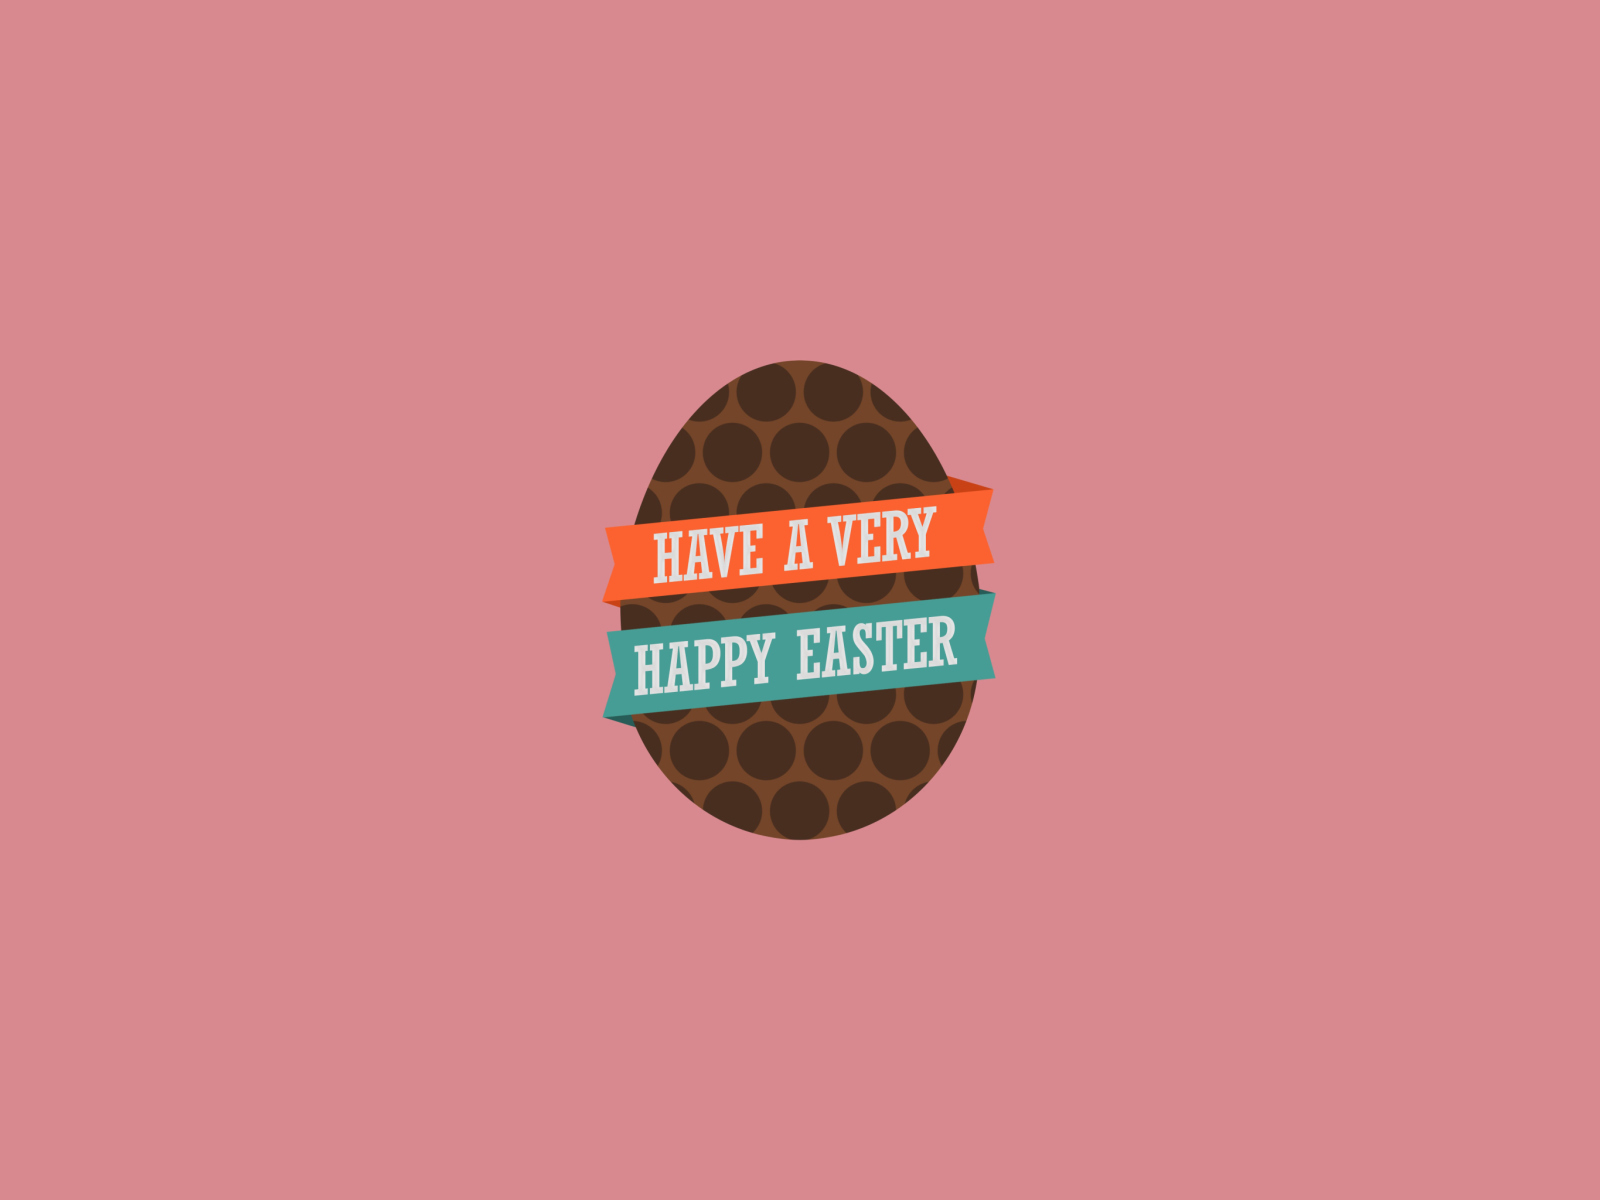 Very Happy Easter Egg wallpaper 1600x1200